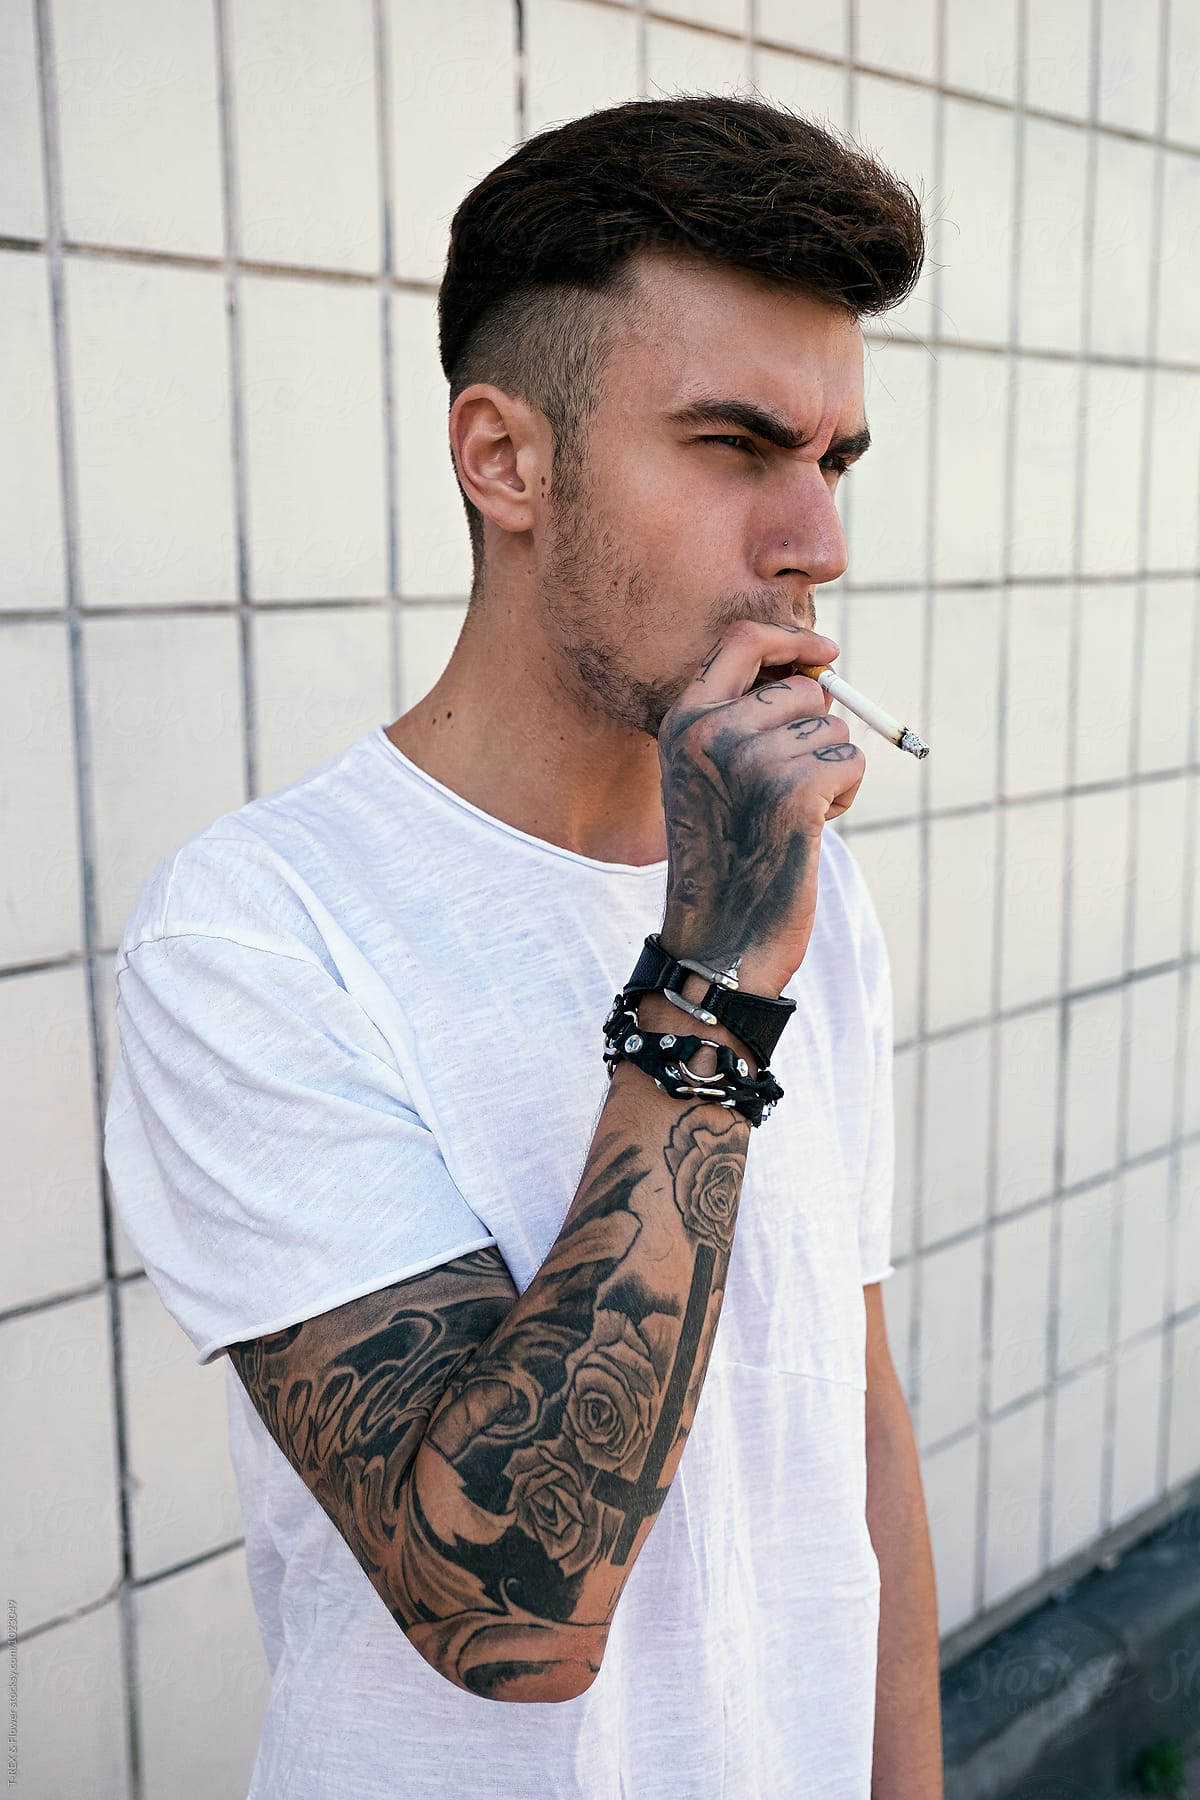 Serious Bearded Man With Tattooed Arms Smoking Cigarette